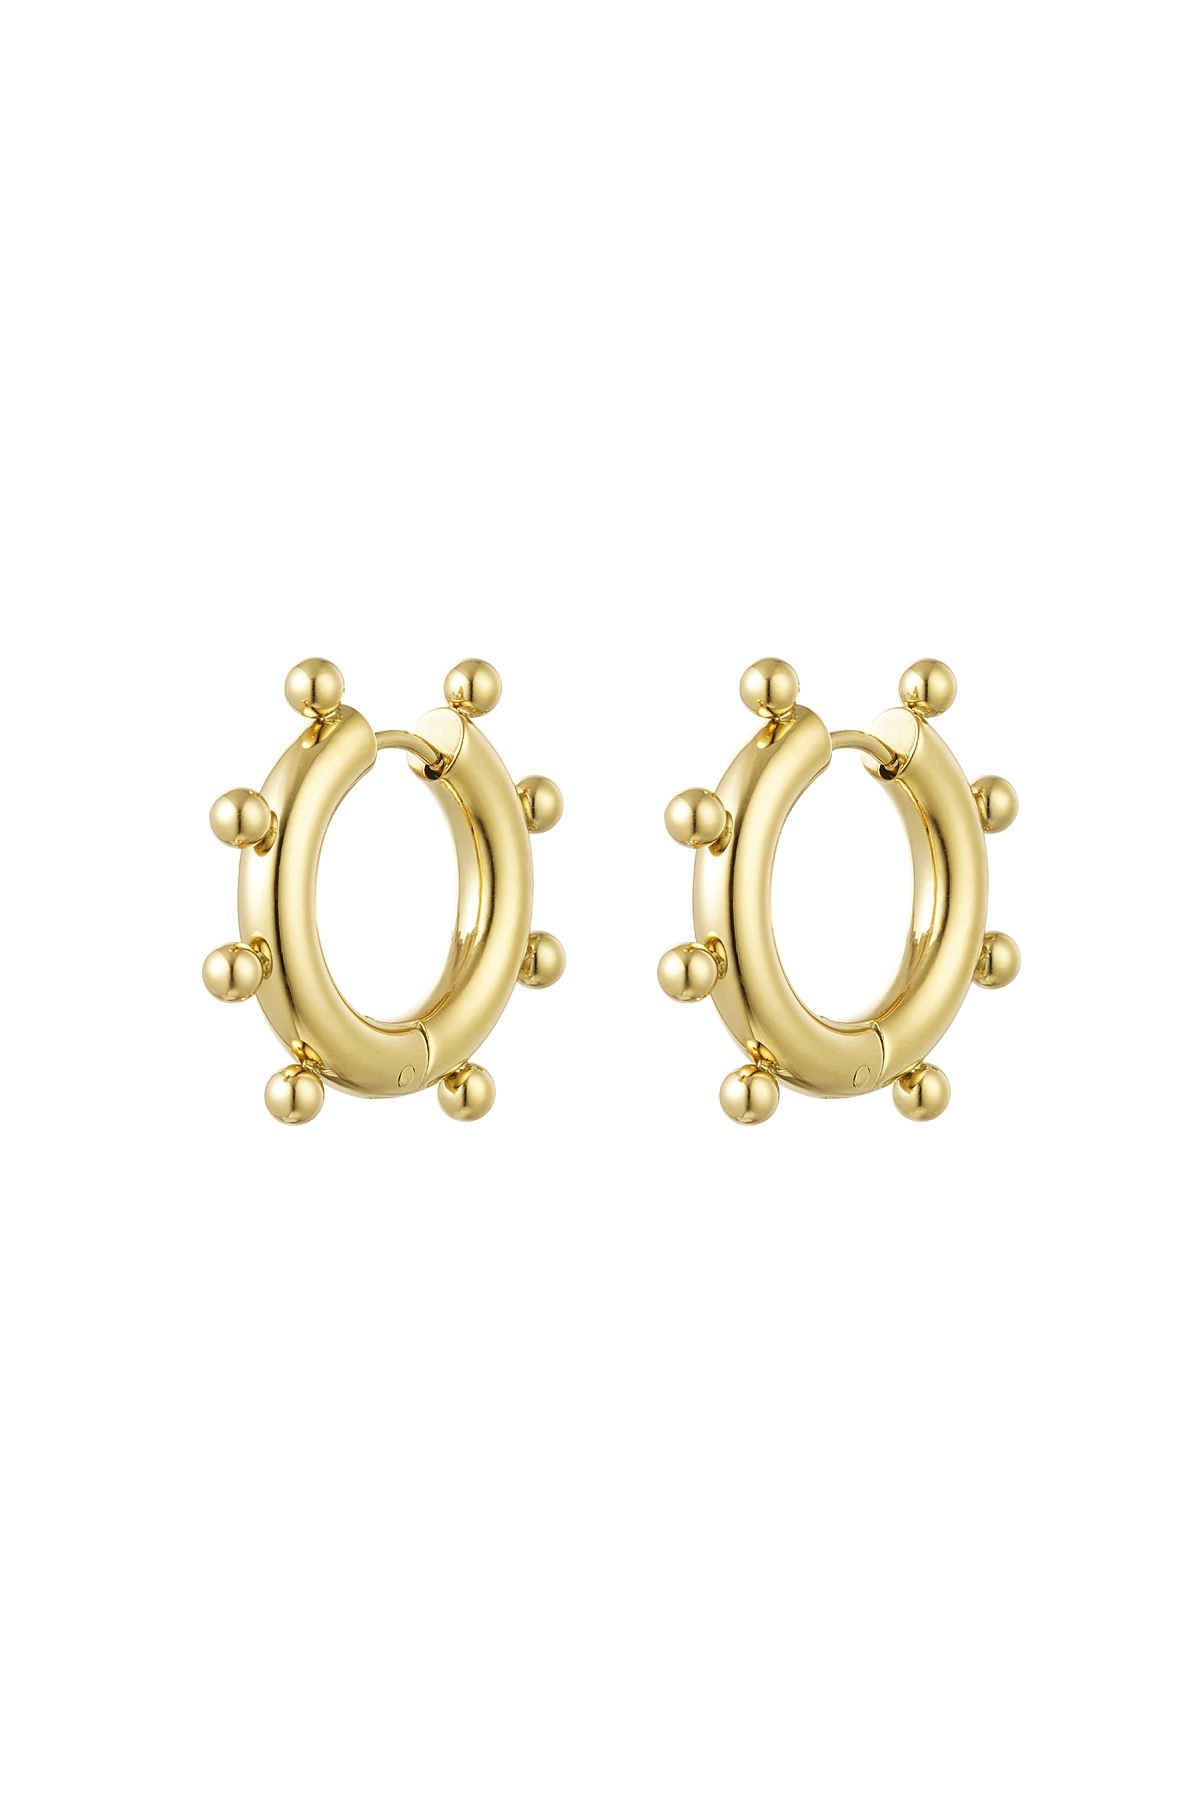 Earrings round balls large - gold Stainless Steel h5 